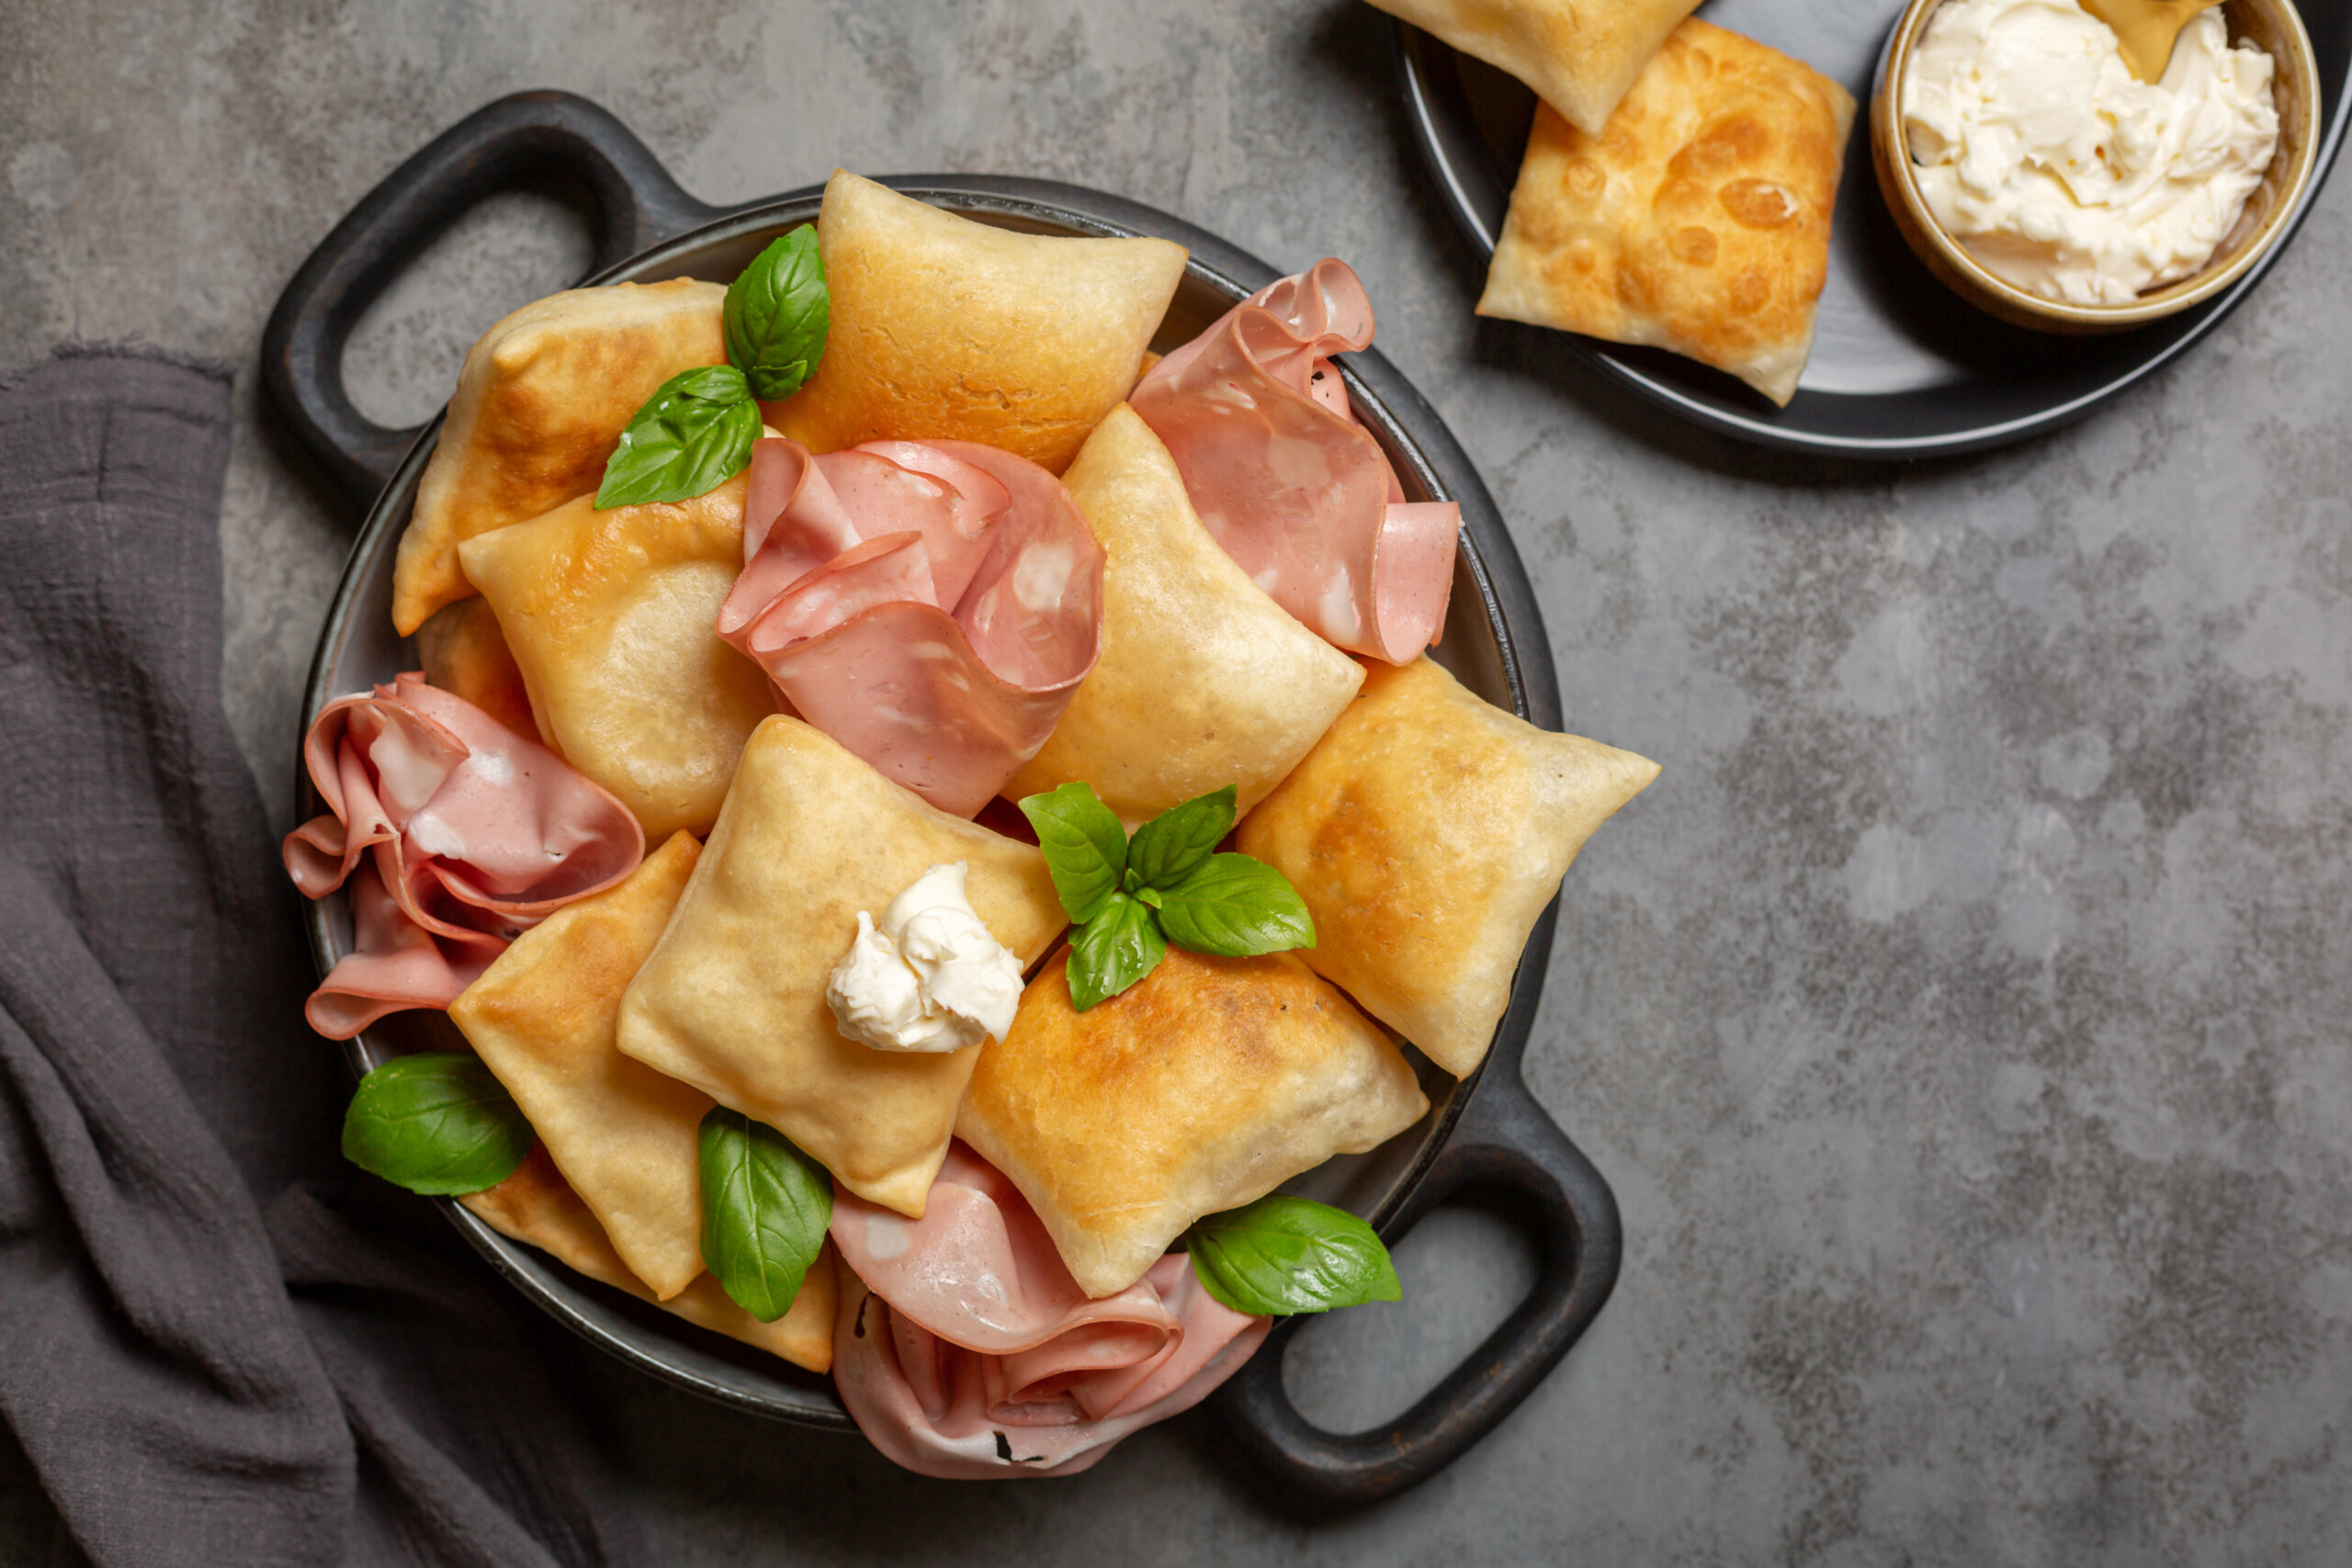 Emilia Romania, Top view of Italian appetizer. Fried bread crescentine or gnocco fritto with mortadella and soft cheese, decorated with basil leaves. Traditional food.